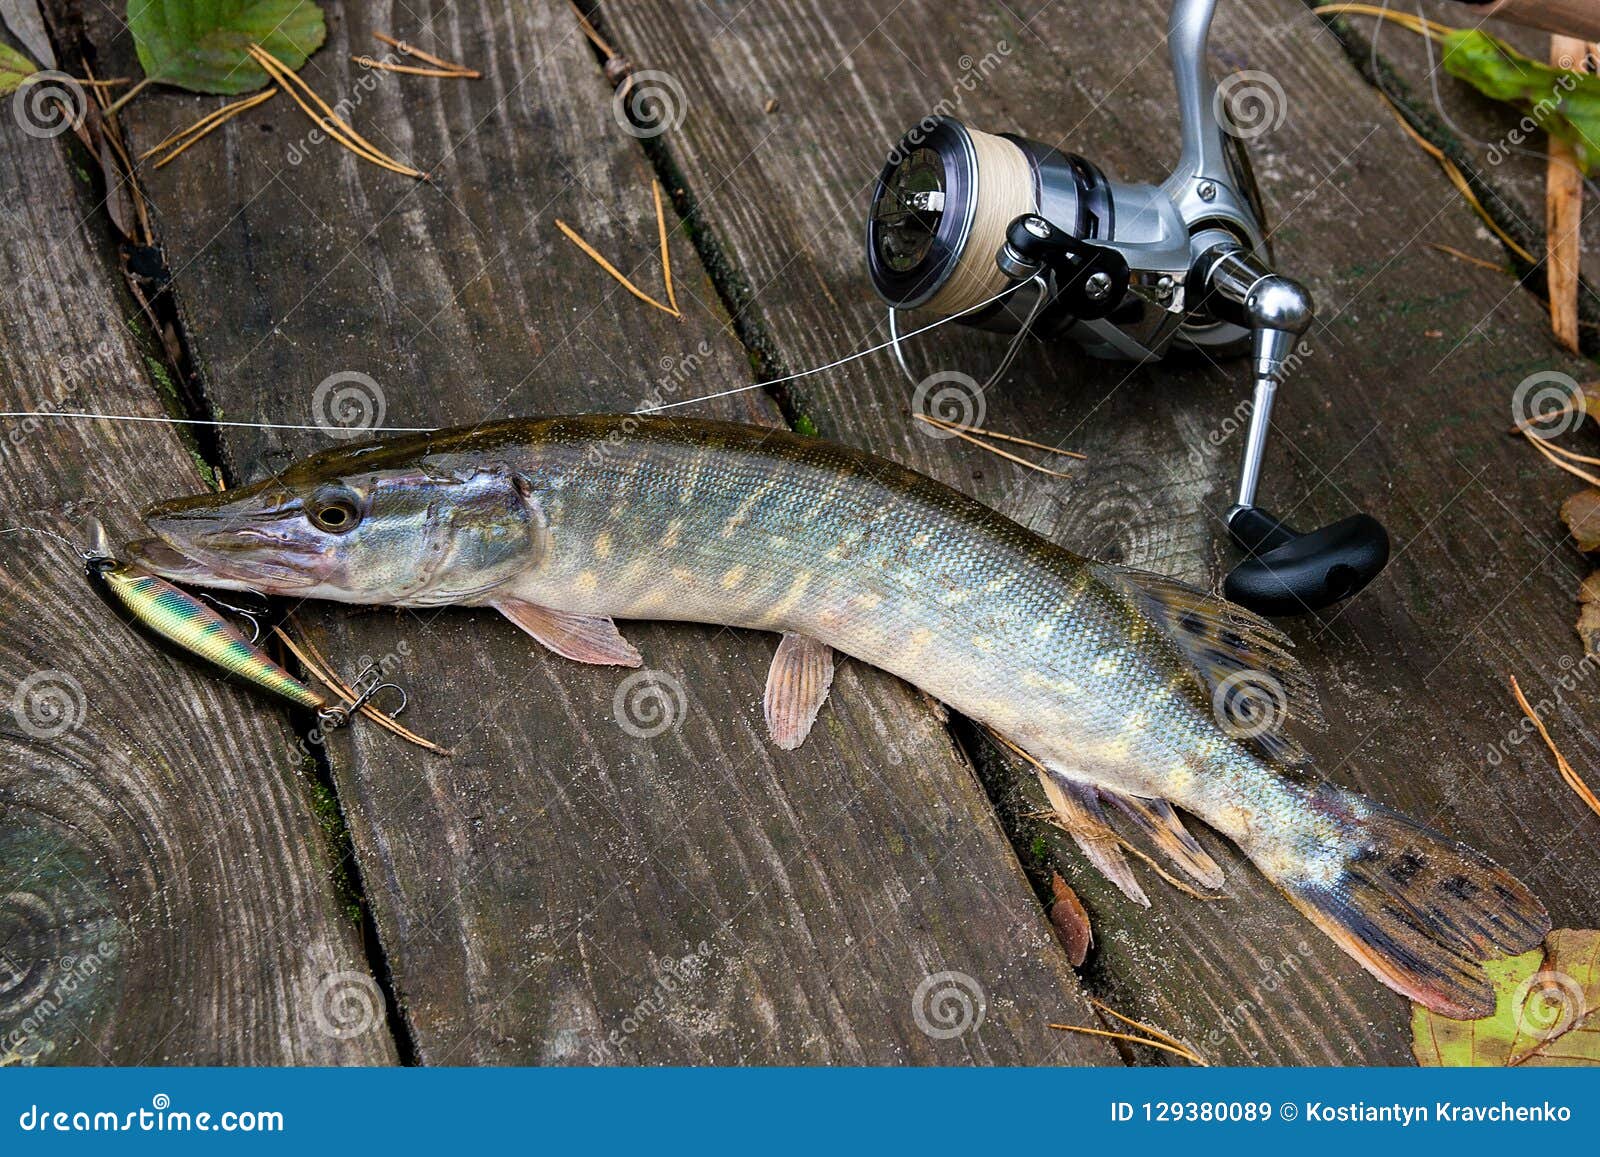 Freshwater Pike with Fishing Bait in Mouth and Fishing Equipment